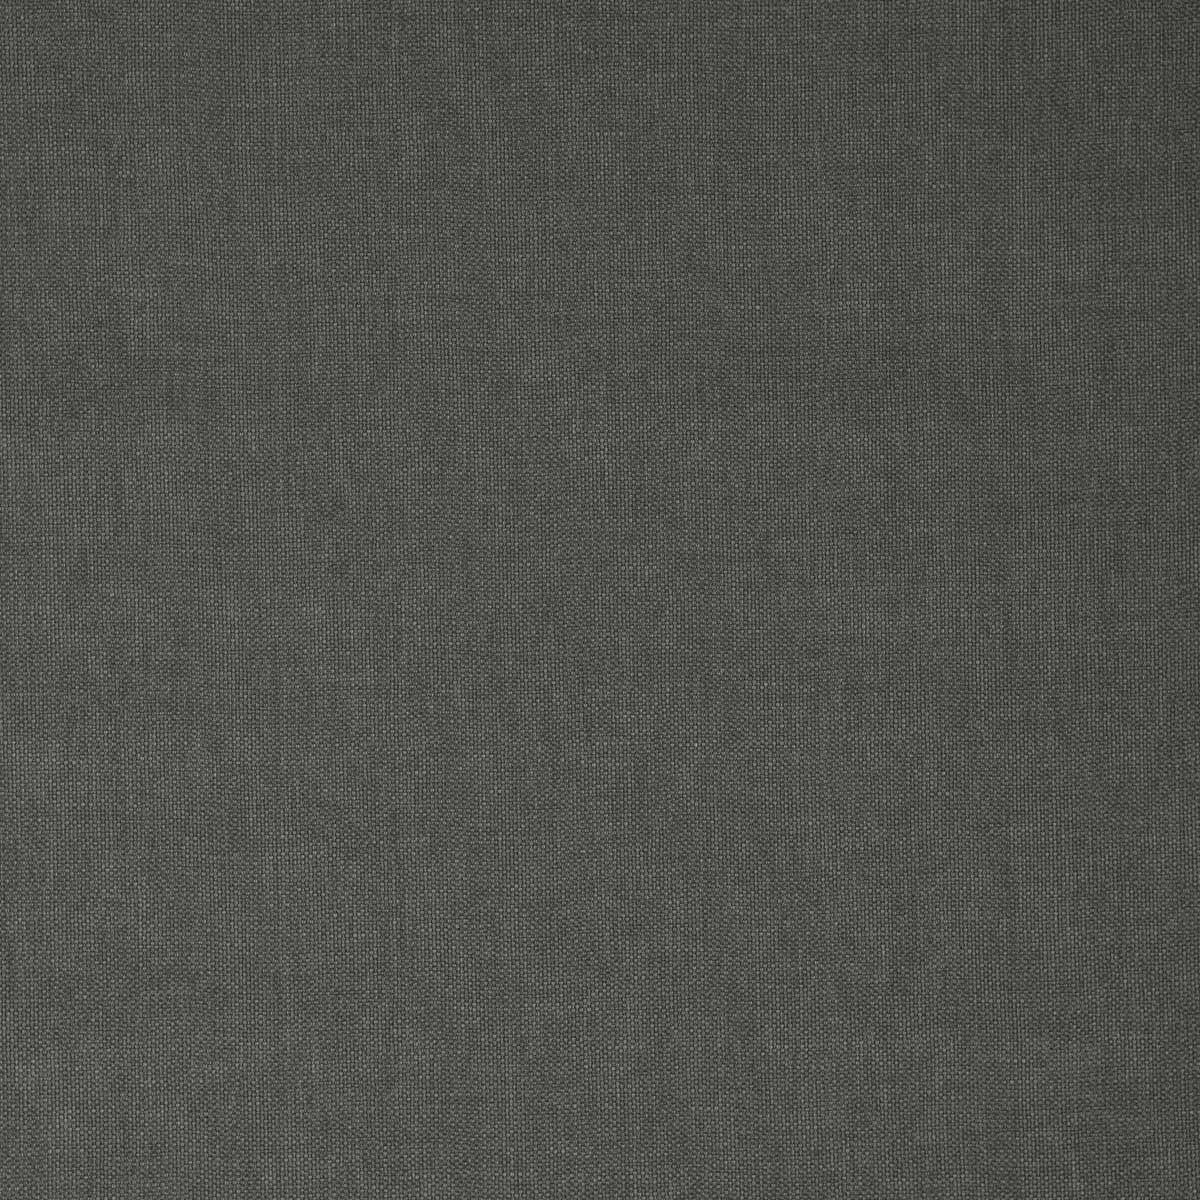 Delta Fabric in Pewter Grey | Linwood Arlo Collection | Bedroom ...